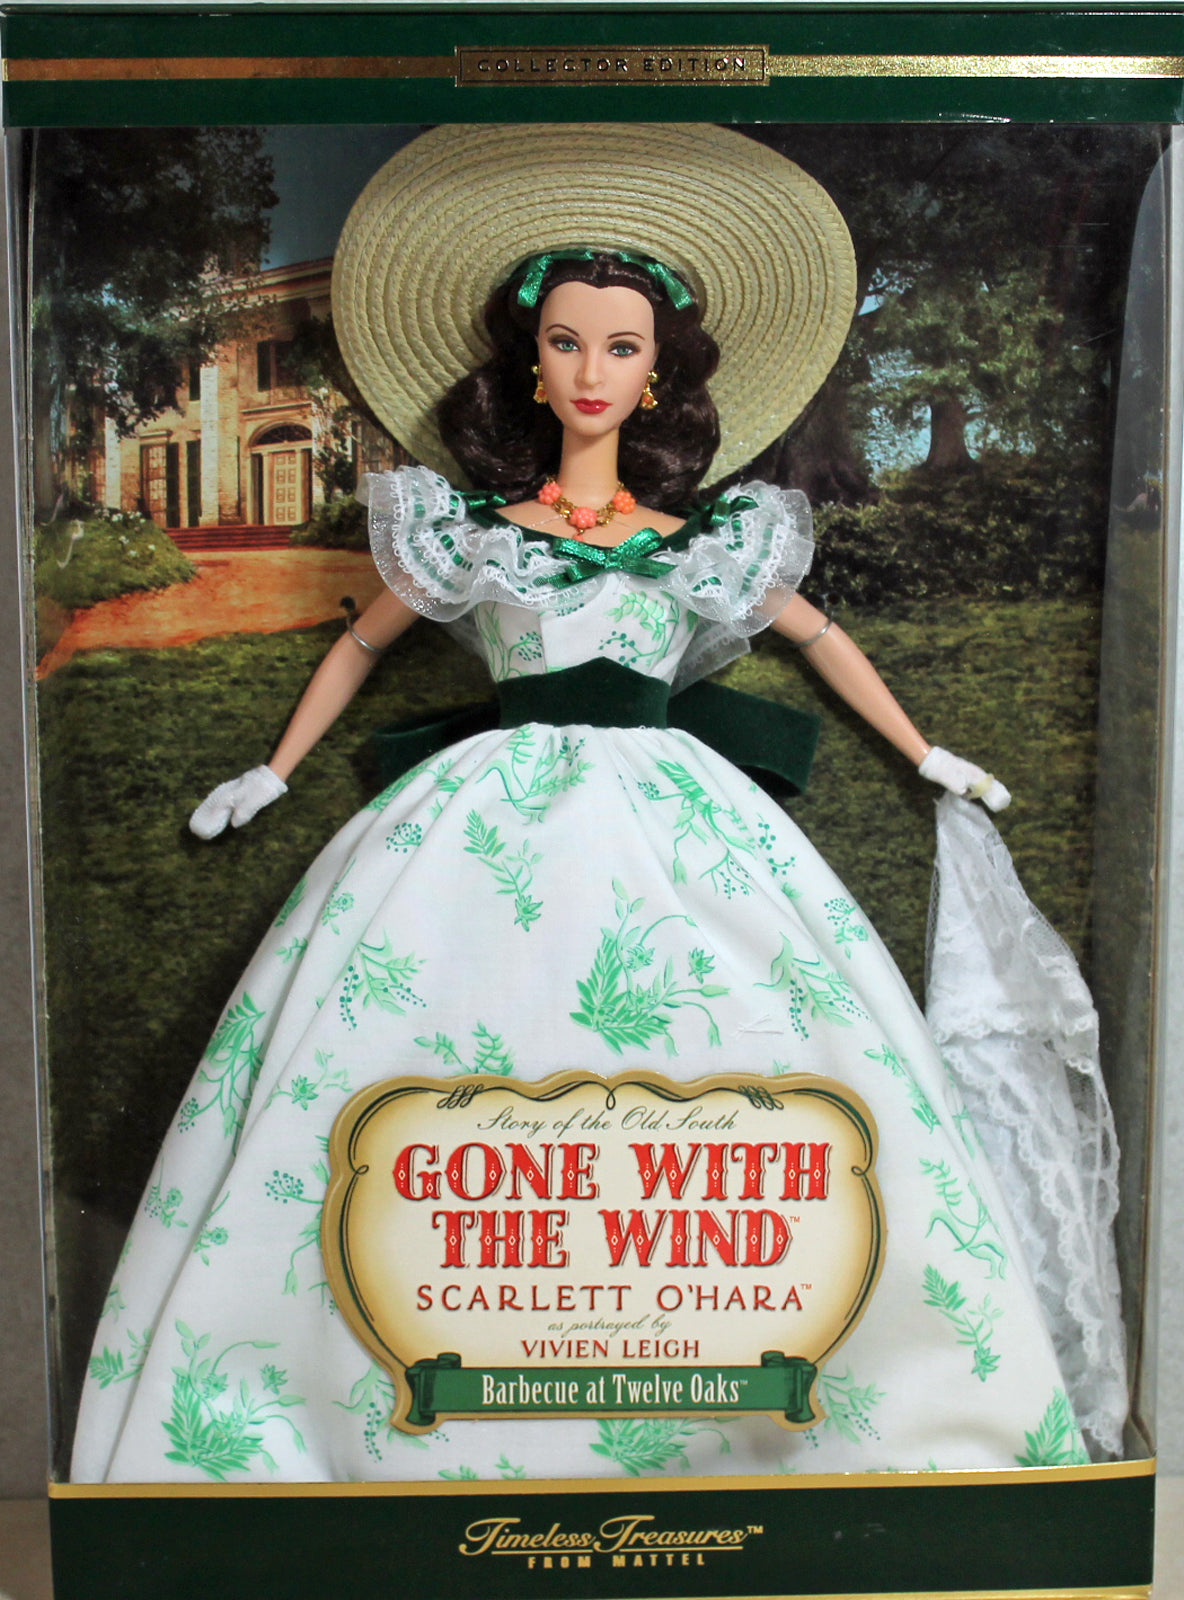 Scarlett O´Hara Doll   Gone With The wind   Barbecue At Twelve